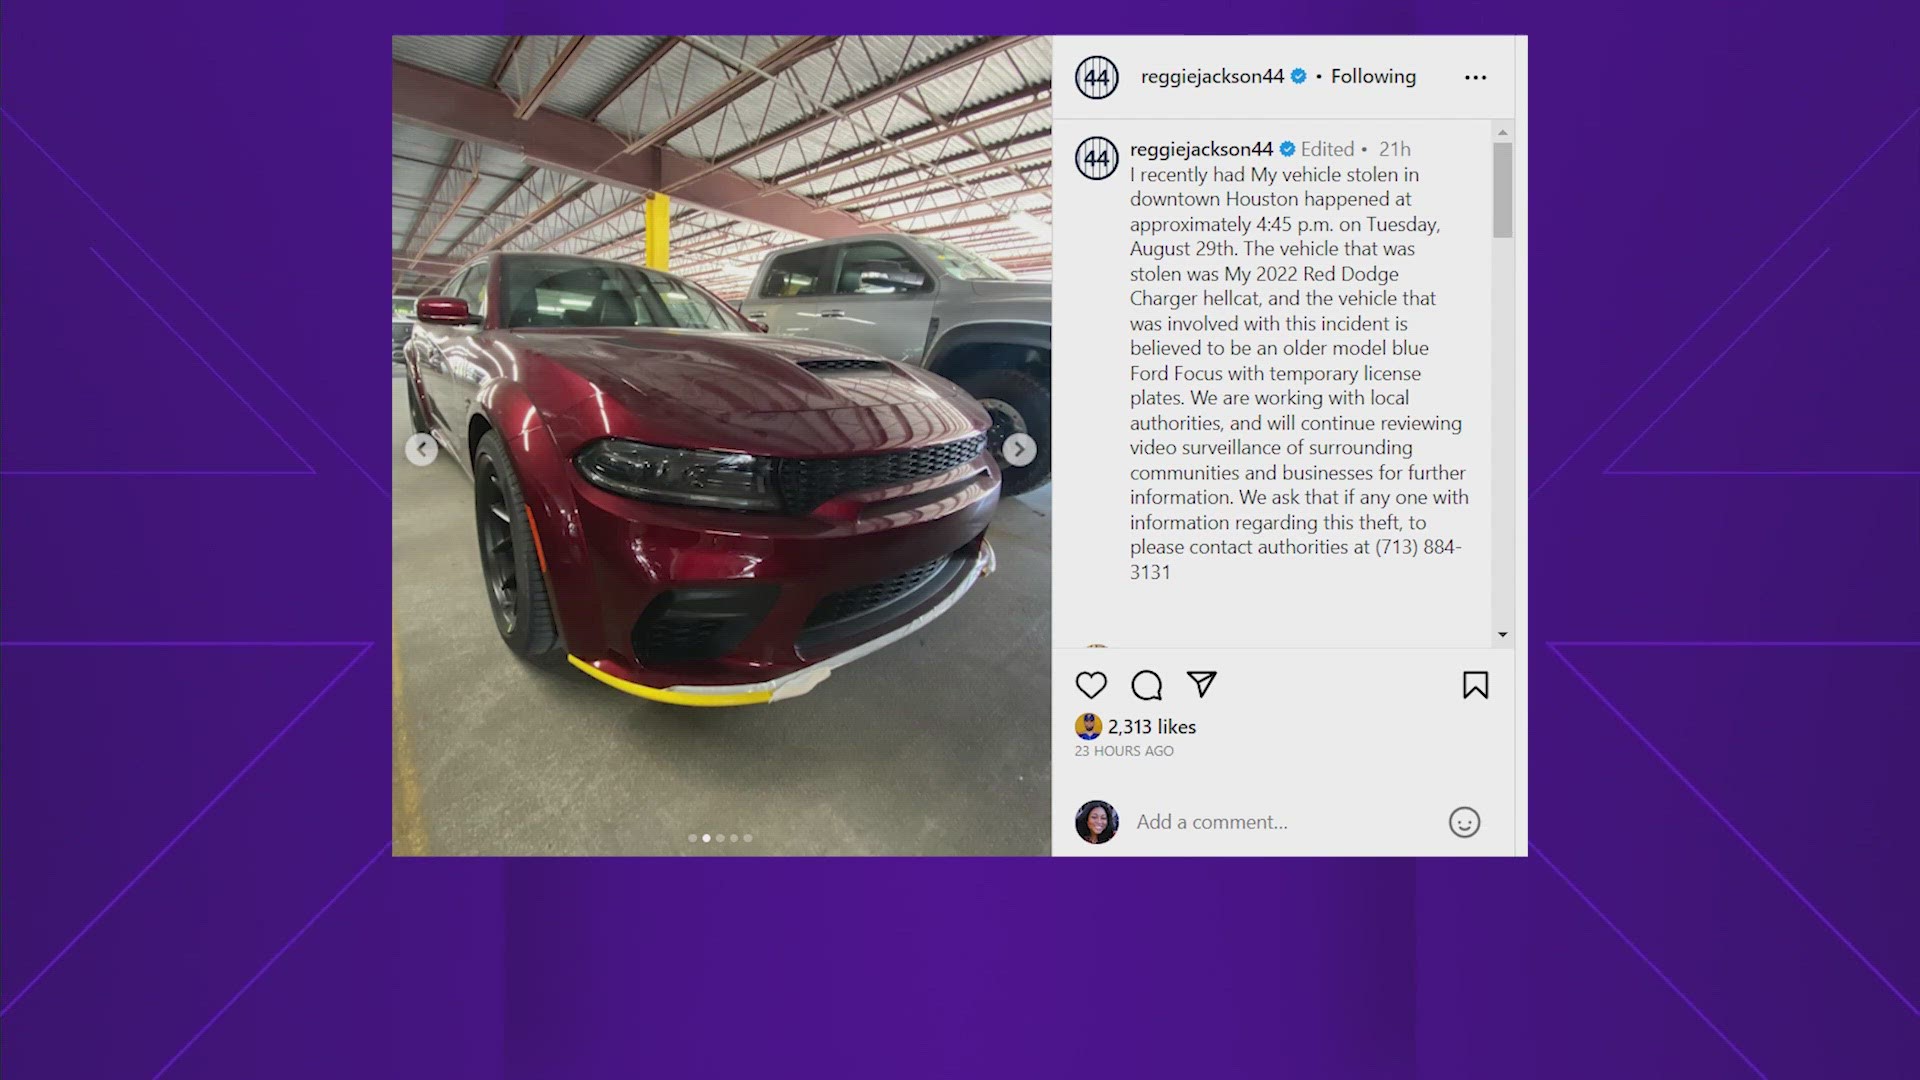 Hall of Famer Reggie Jackson took to Instagram to ask for help finding who stole his car in downtown Houston earlier this week.